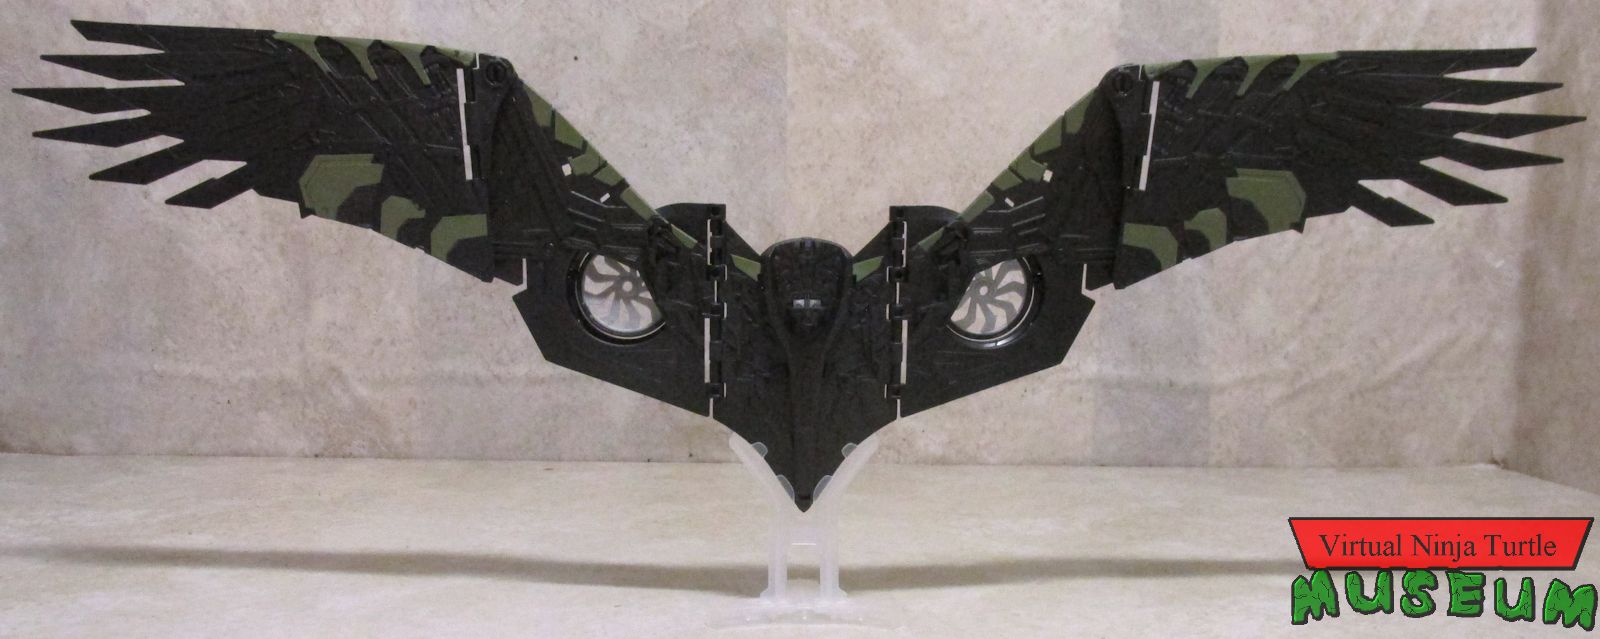 assembled wings front